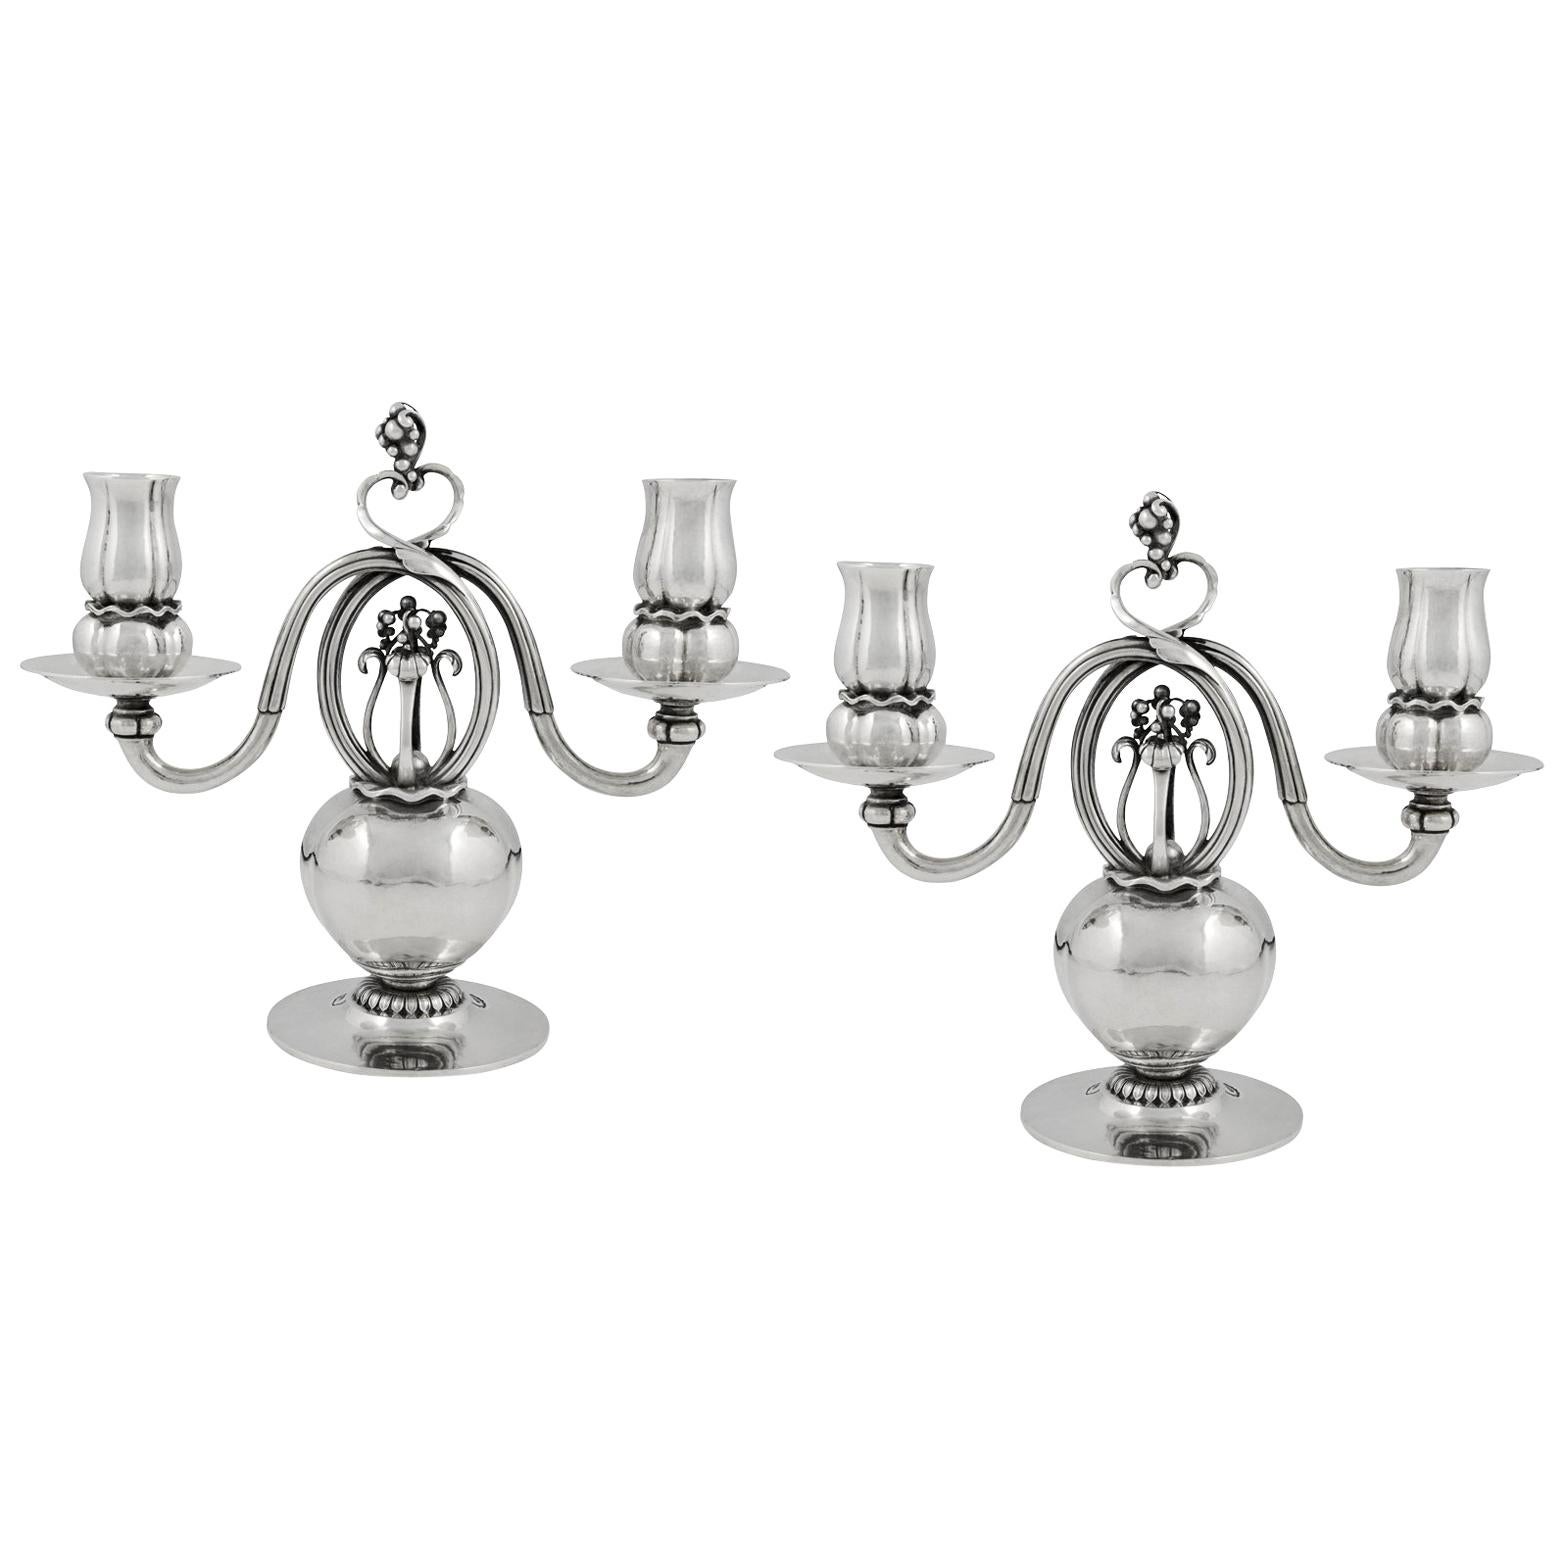 Pair of Sterling Silver Georg Jensen Two-Light Candelabra, Design #324 from 1919 For Sale